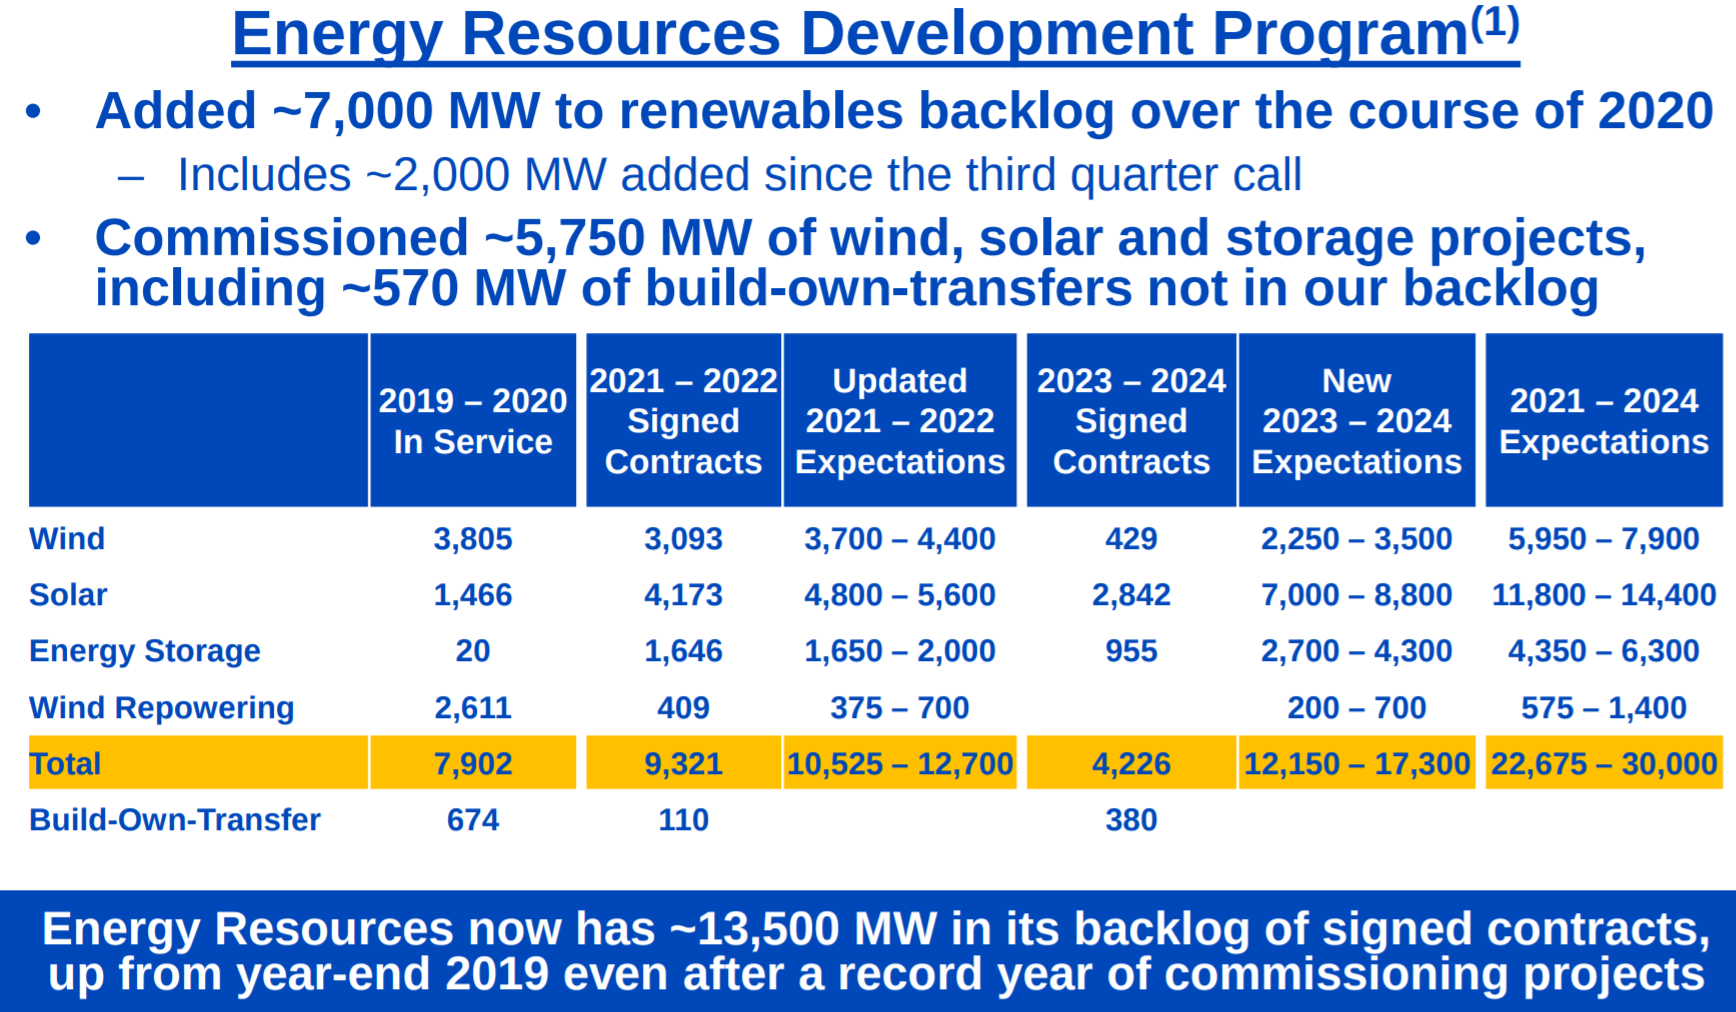 Energy Resources Development Program chart showing 7,000 MW added to renewables backlog in 2020